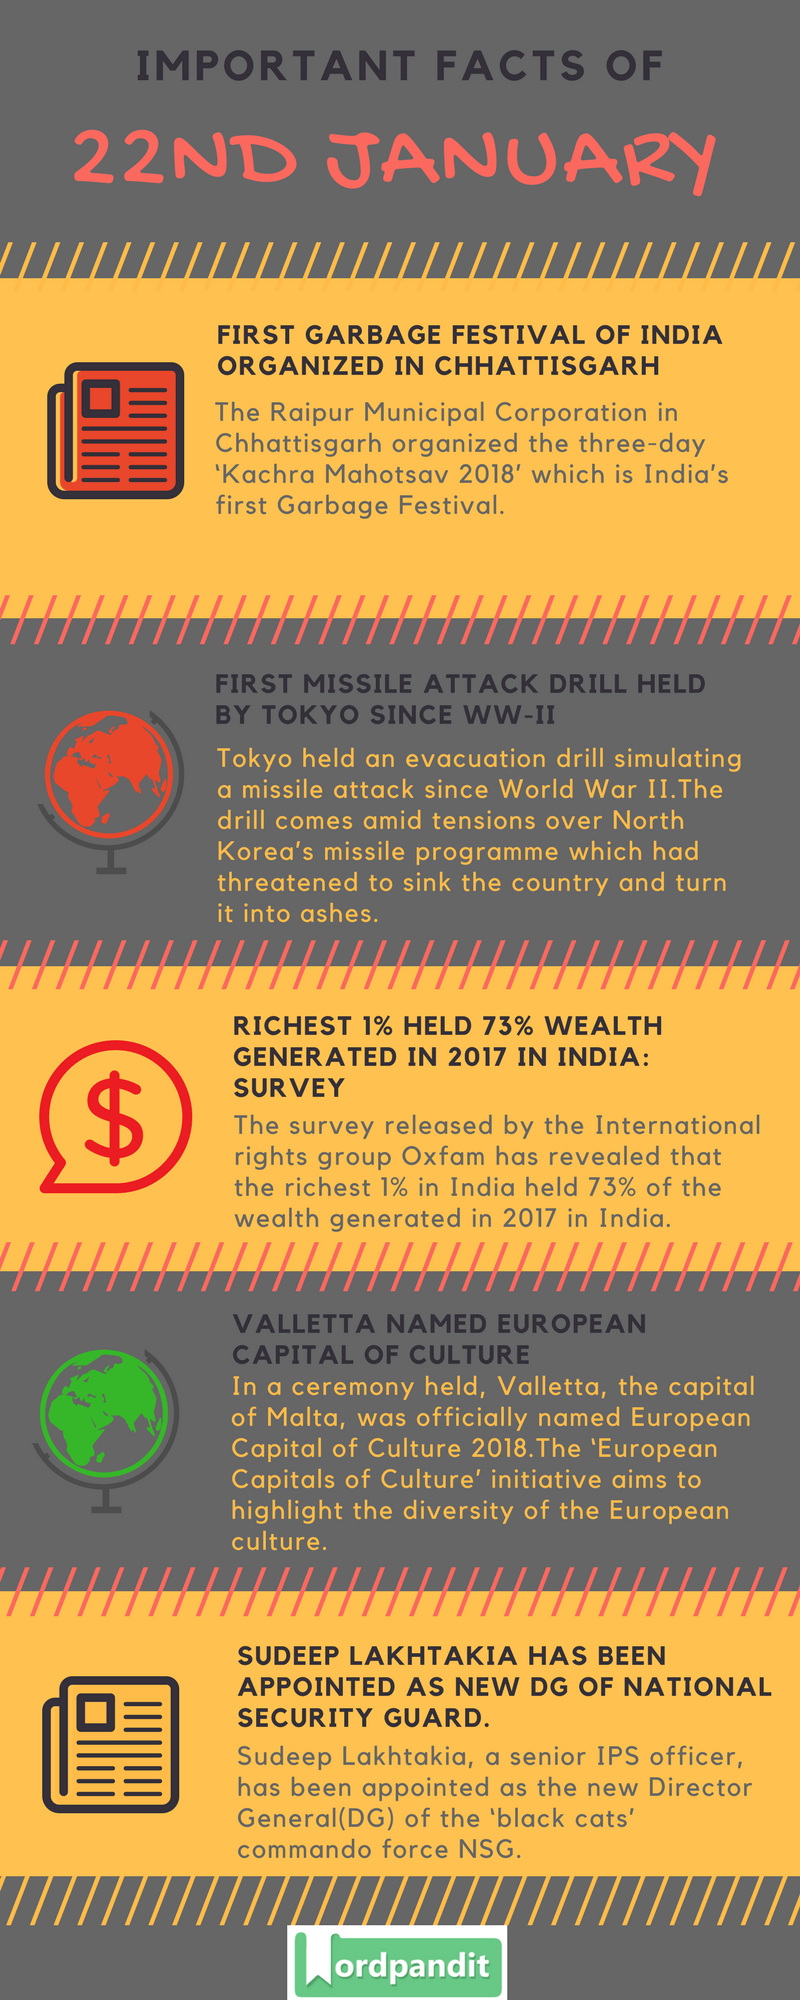 Daily Current Affairs 22 january 2018 Current Affairs Quiz january 22 2018 Current Affairs Infographic